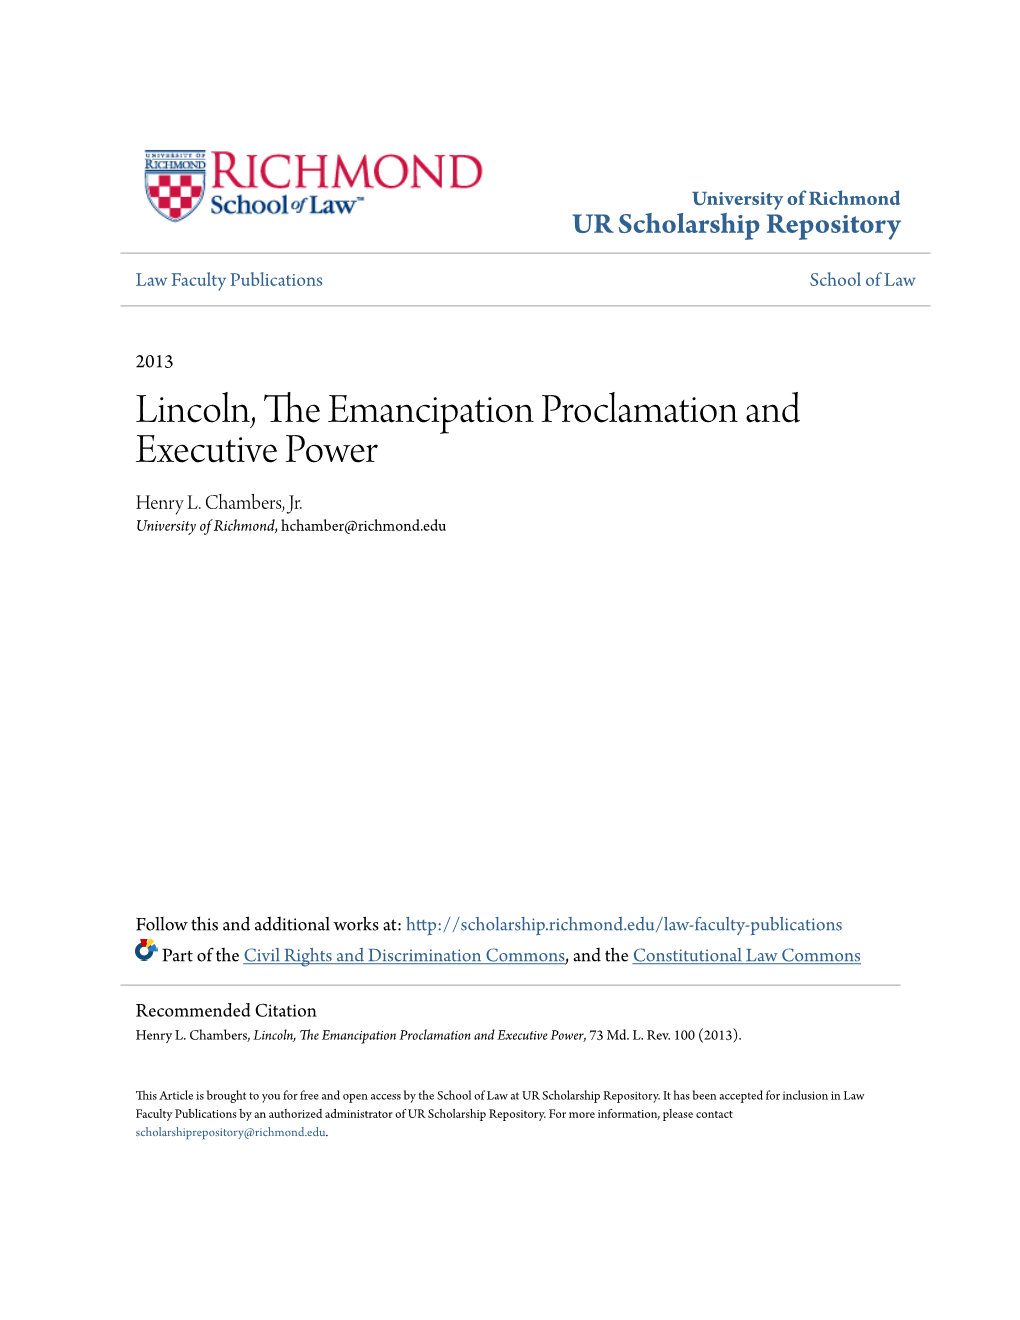 Lincoln, the Emancipation Proclamation and Executive Power, 73 Md